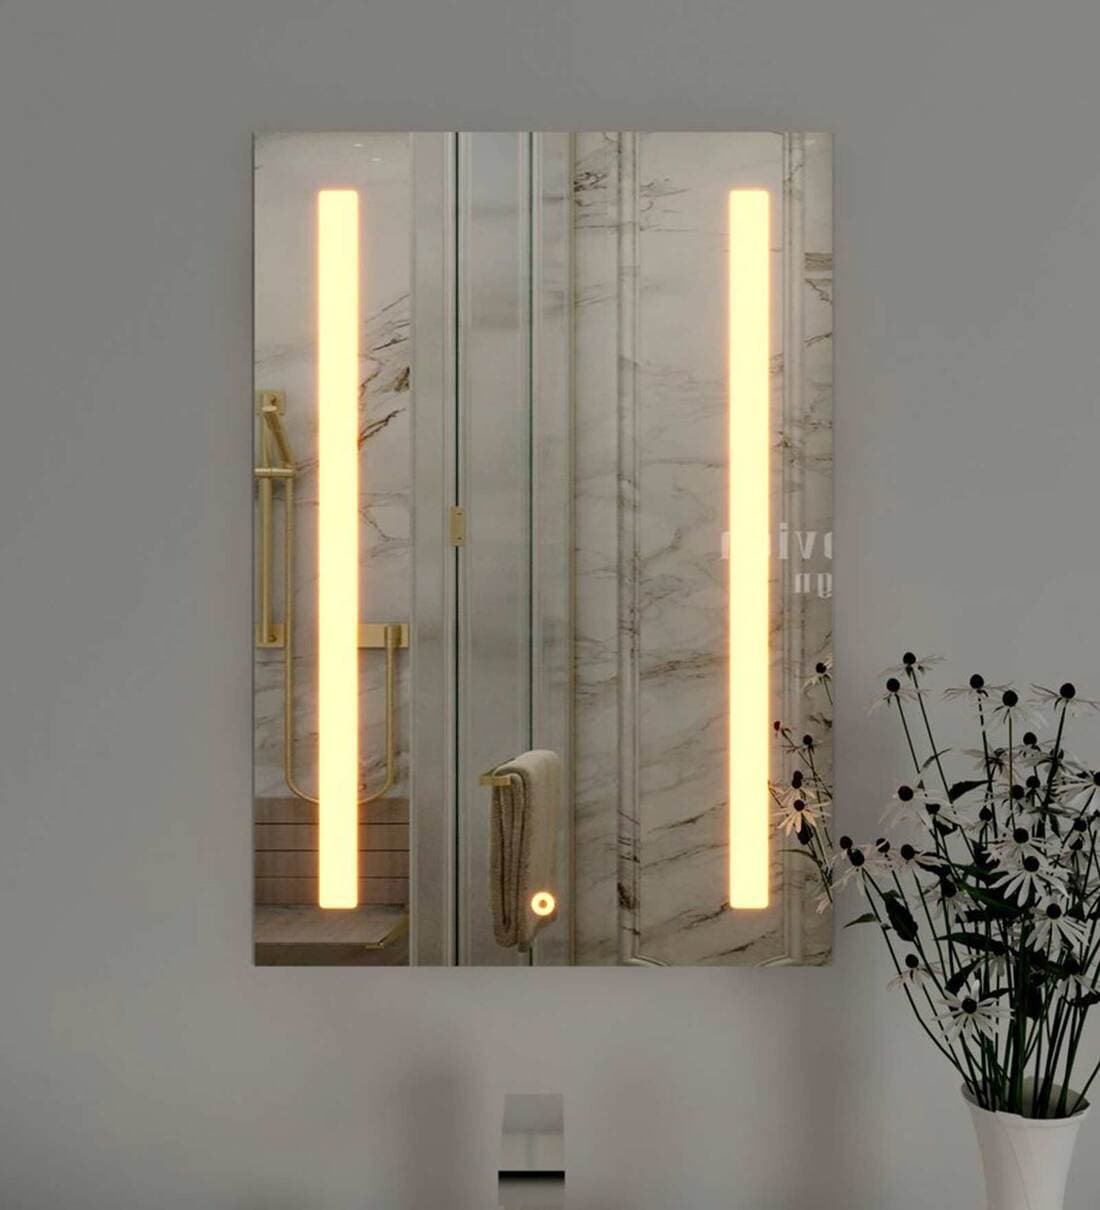 Sleek and Stylish: Design Tips for Incorporating LED Mirrors into Your Décor